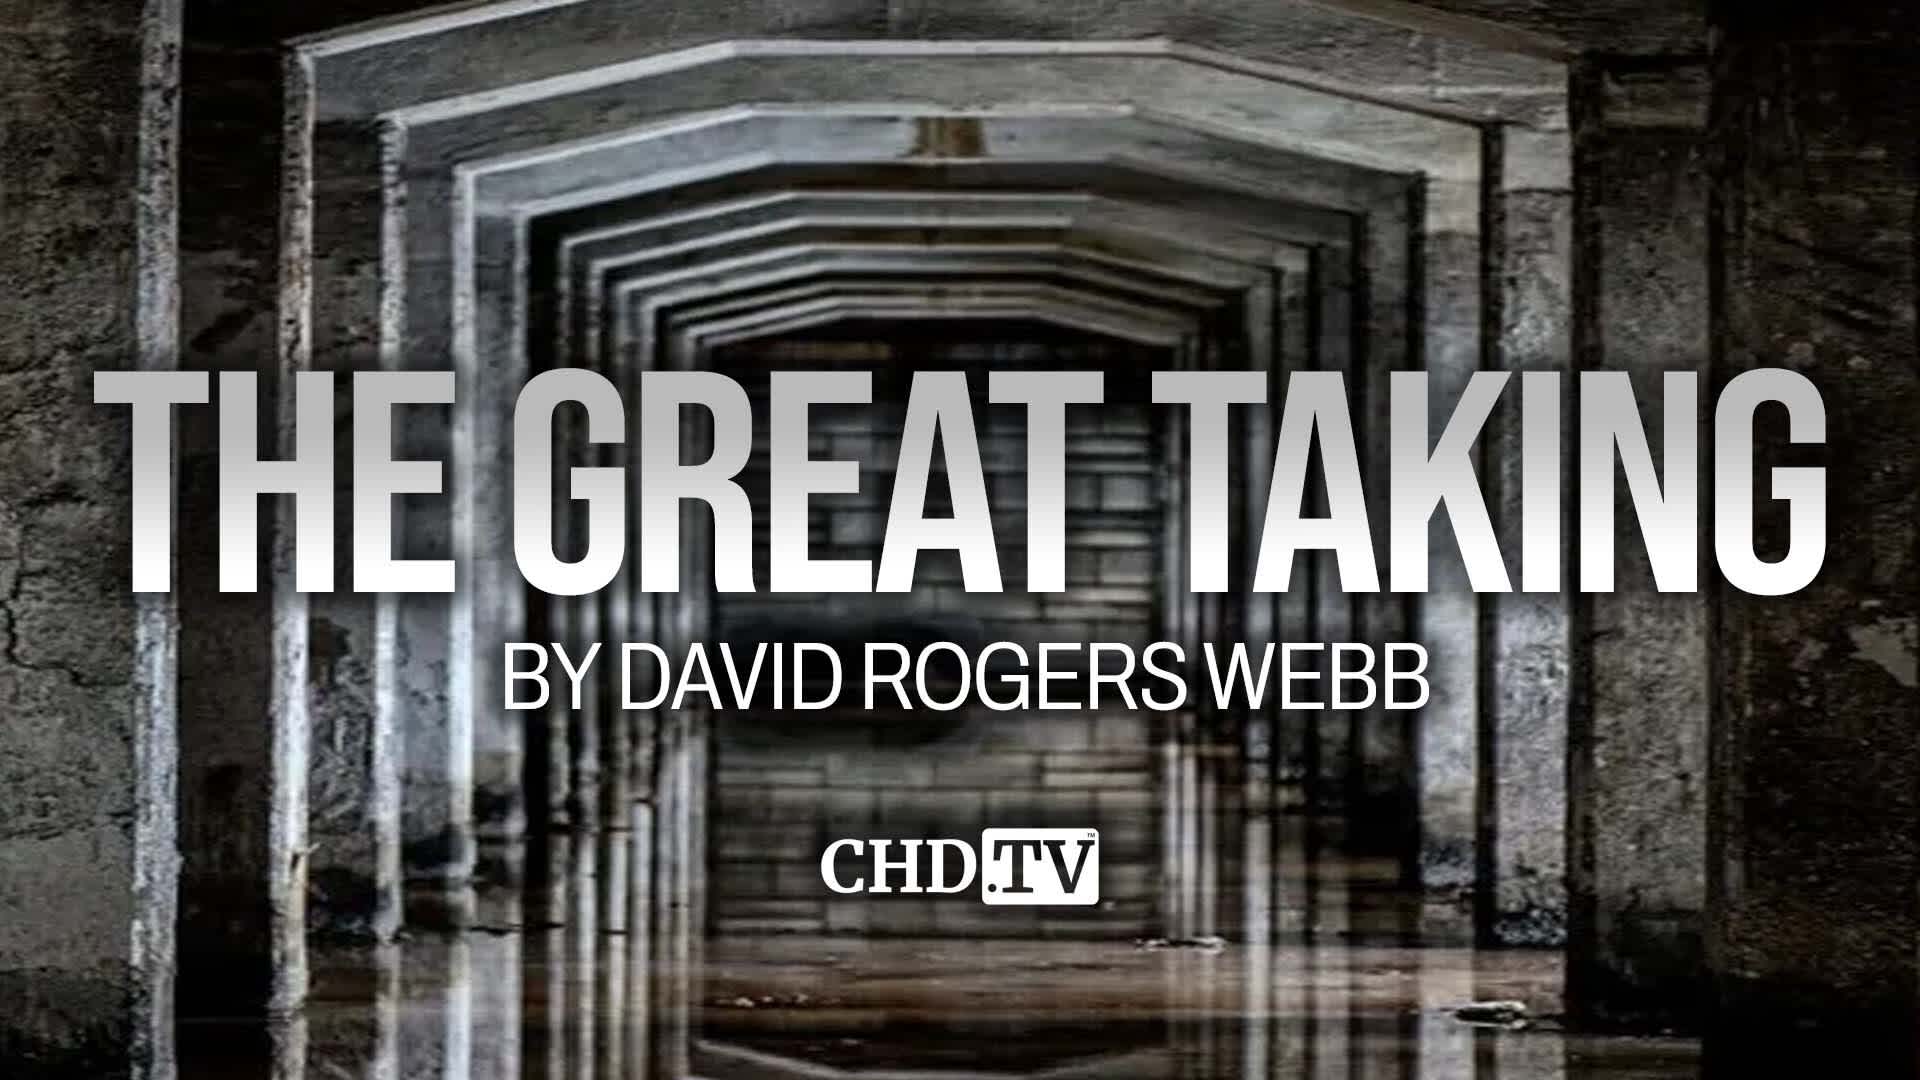 THE GREAT TAKING | FILM PREMIERE